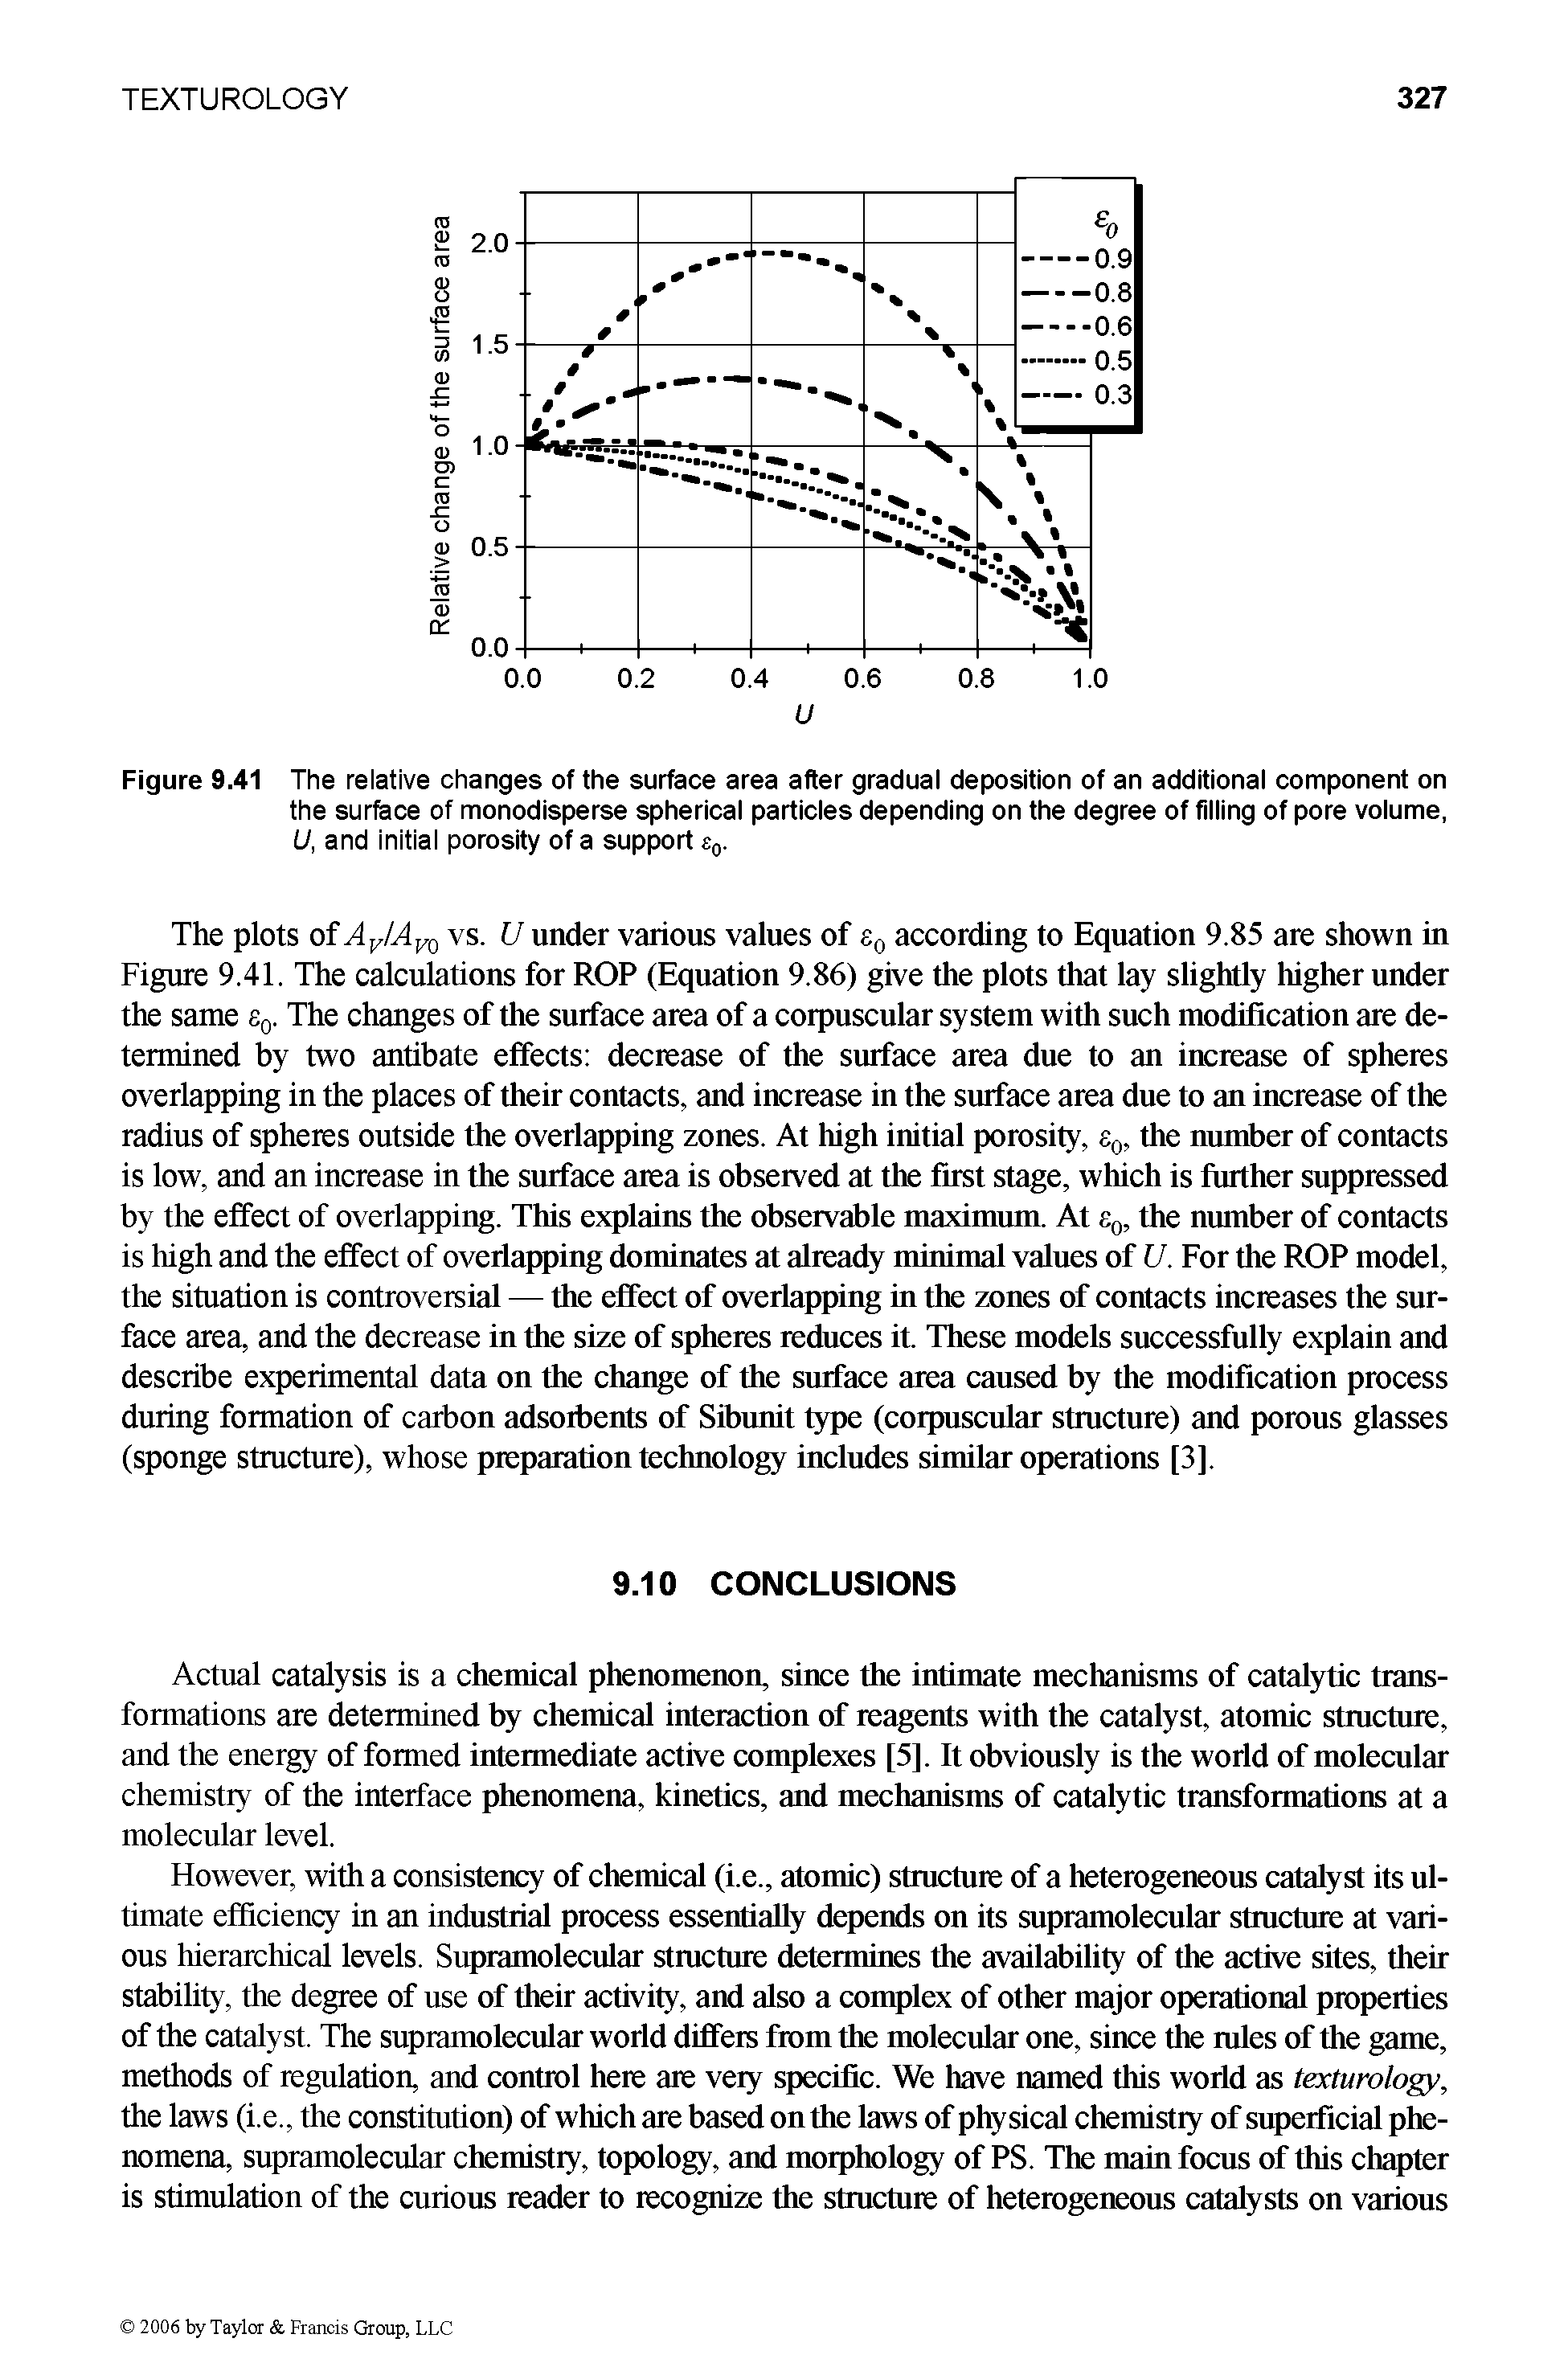 Figure 9.41 The relative changes of the surface area after gradual deposition of an additional component on the surface of monodisperse spherical particles depending on the degree of filling of pore volume, U, and initial porosity of a support s0.